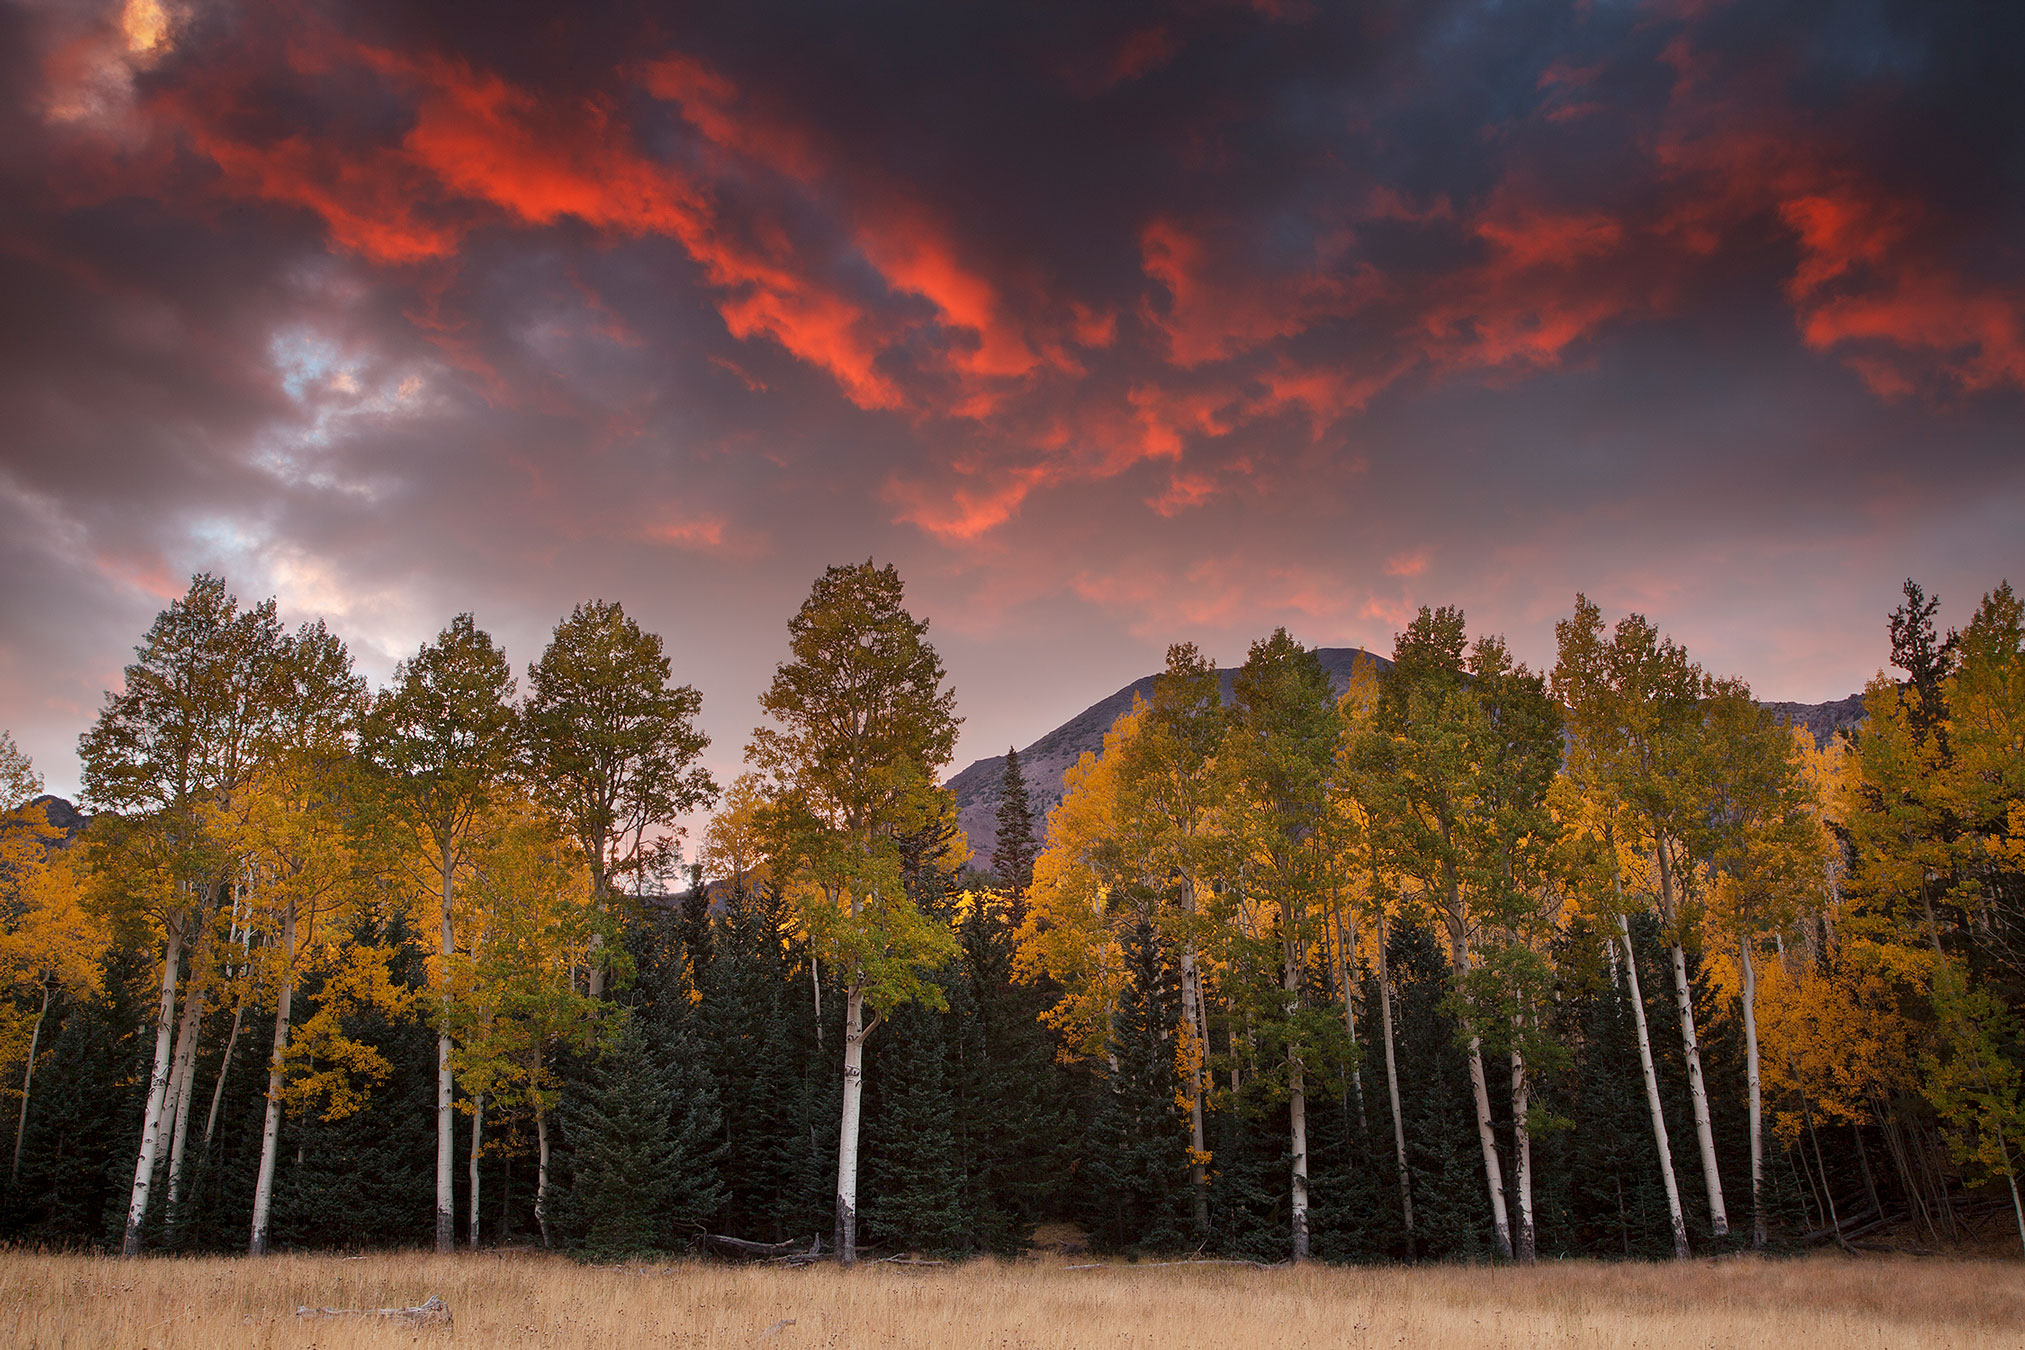 Aspen trees with fall colors at sunset at the Inner Basin of the San Francisco Peaks in northern Arizona